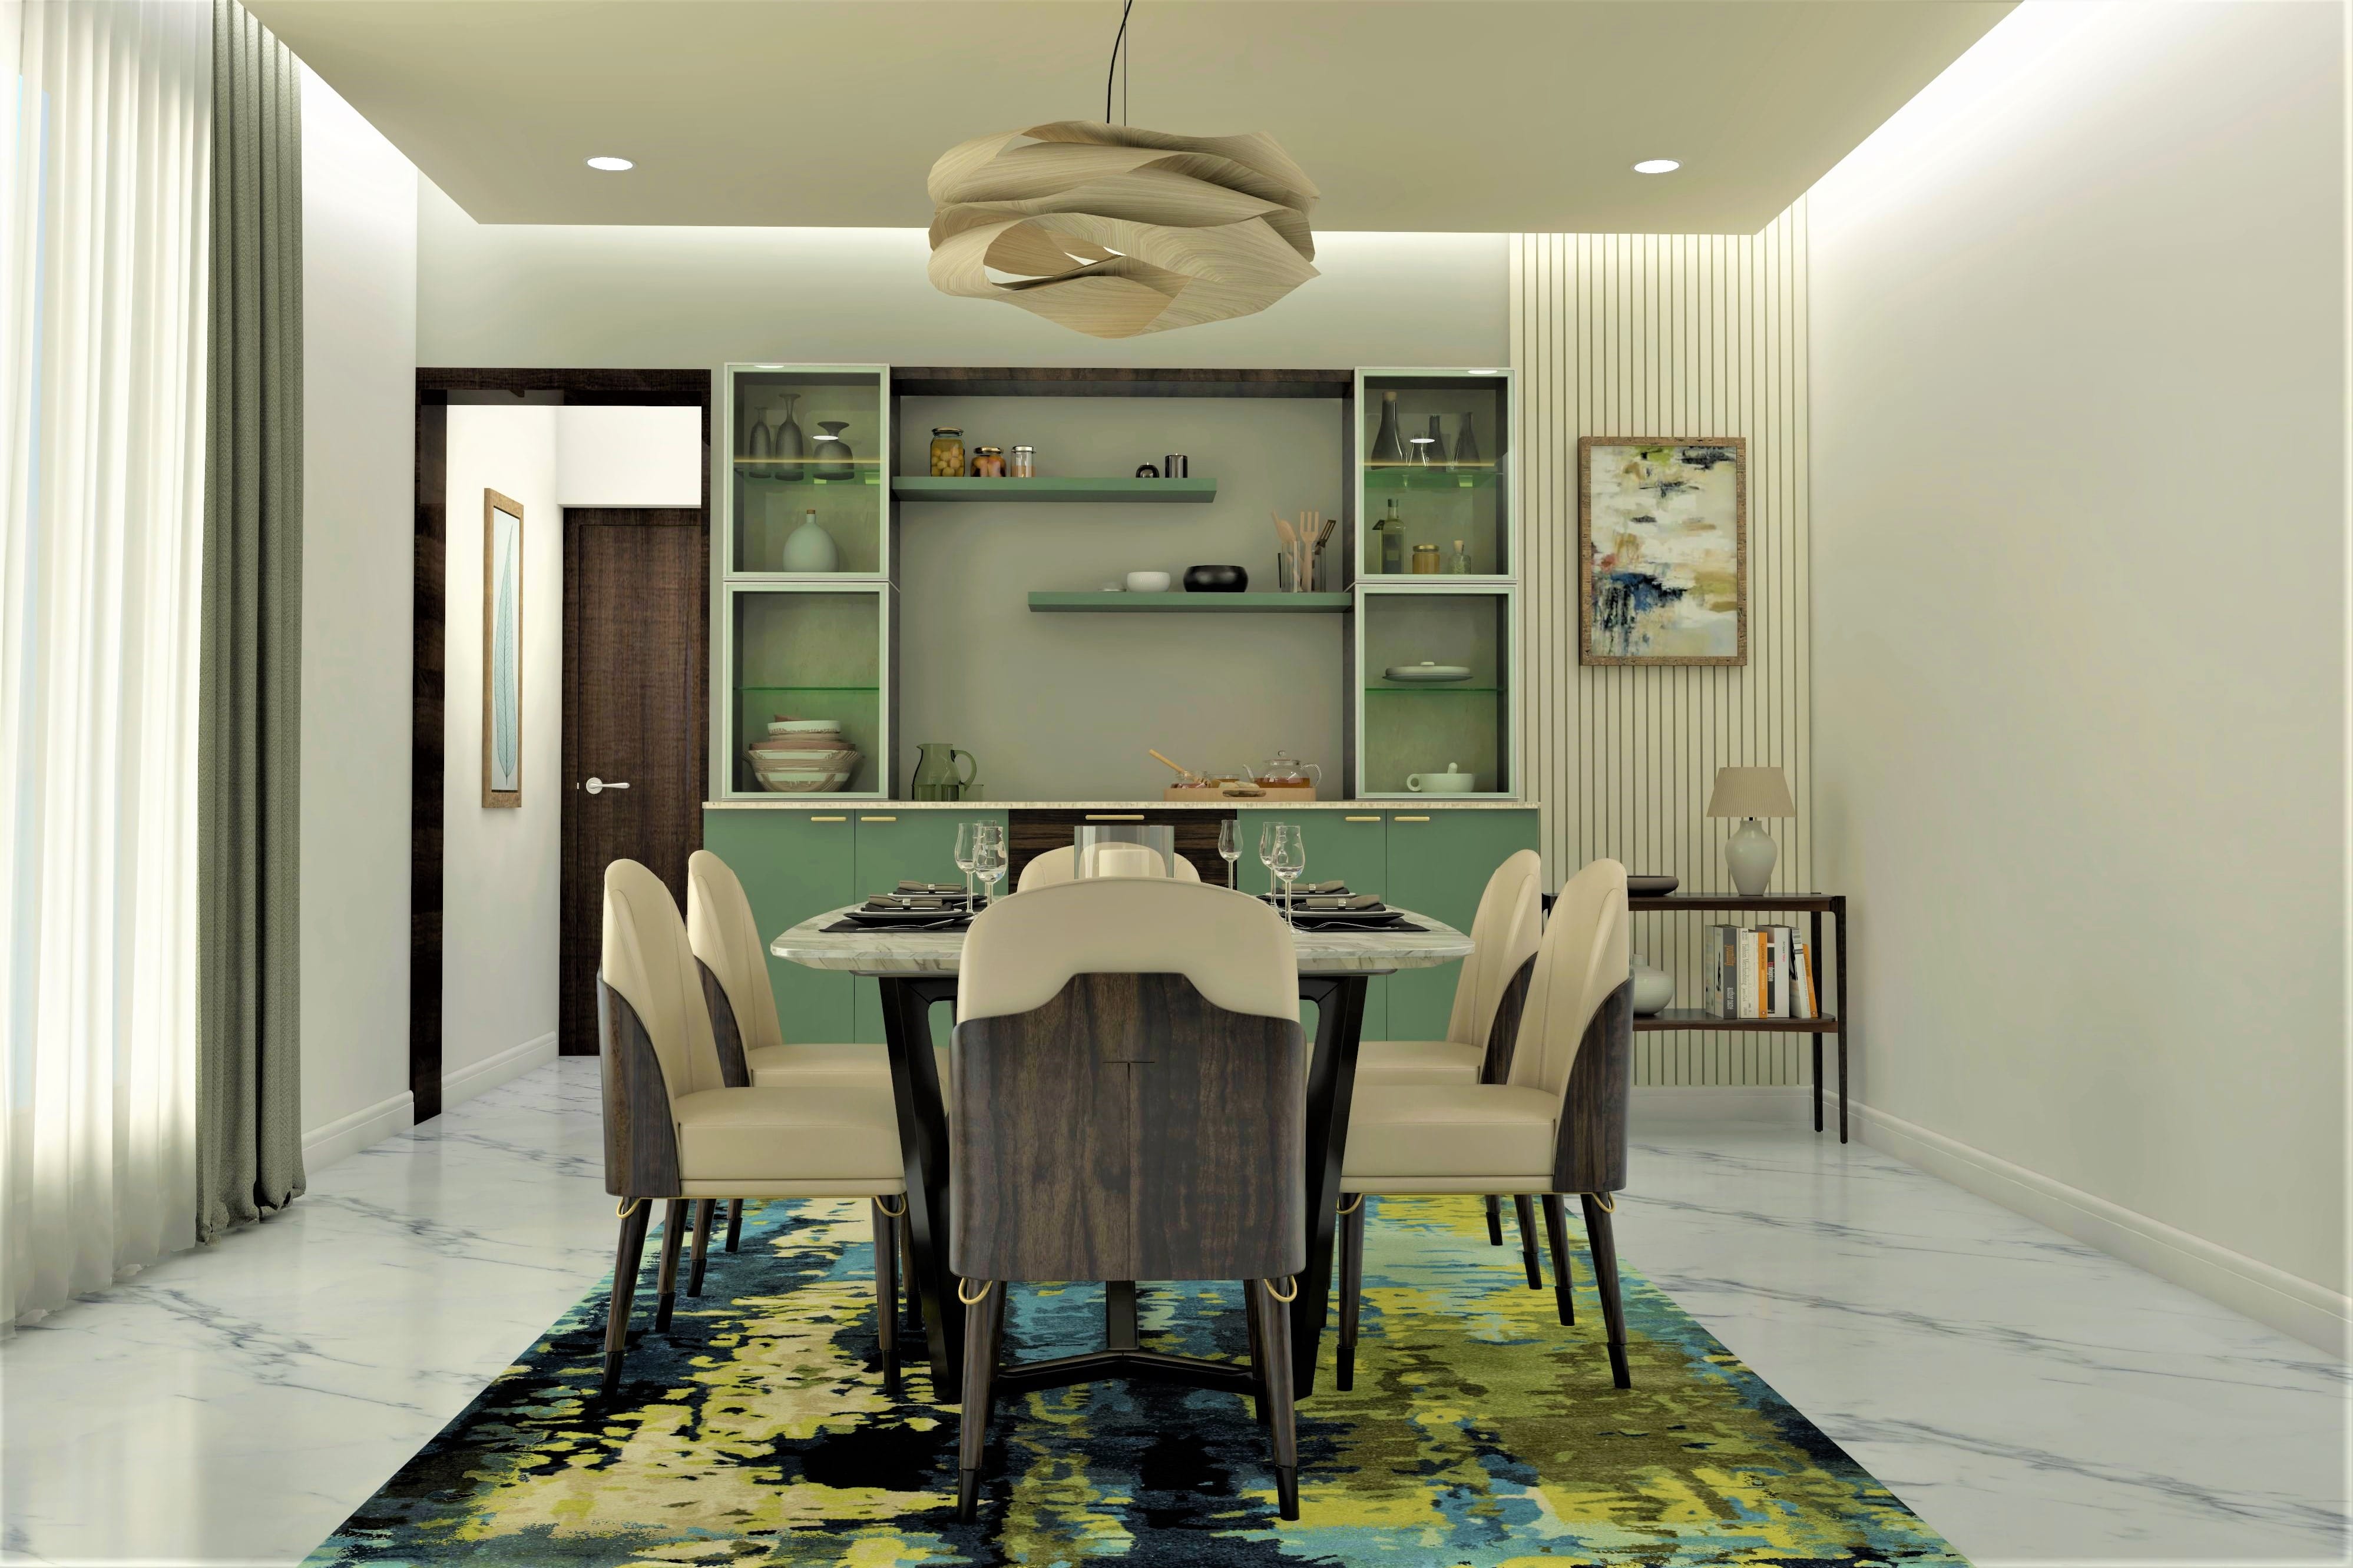 Dining room design perfect for entertaining - Beautiful Homes